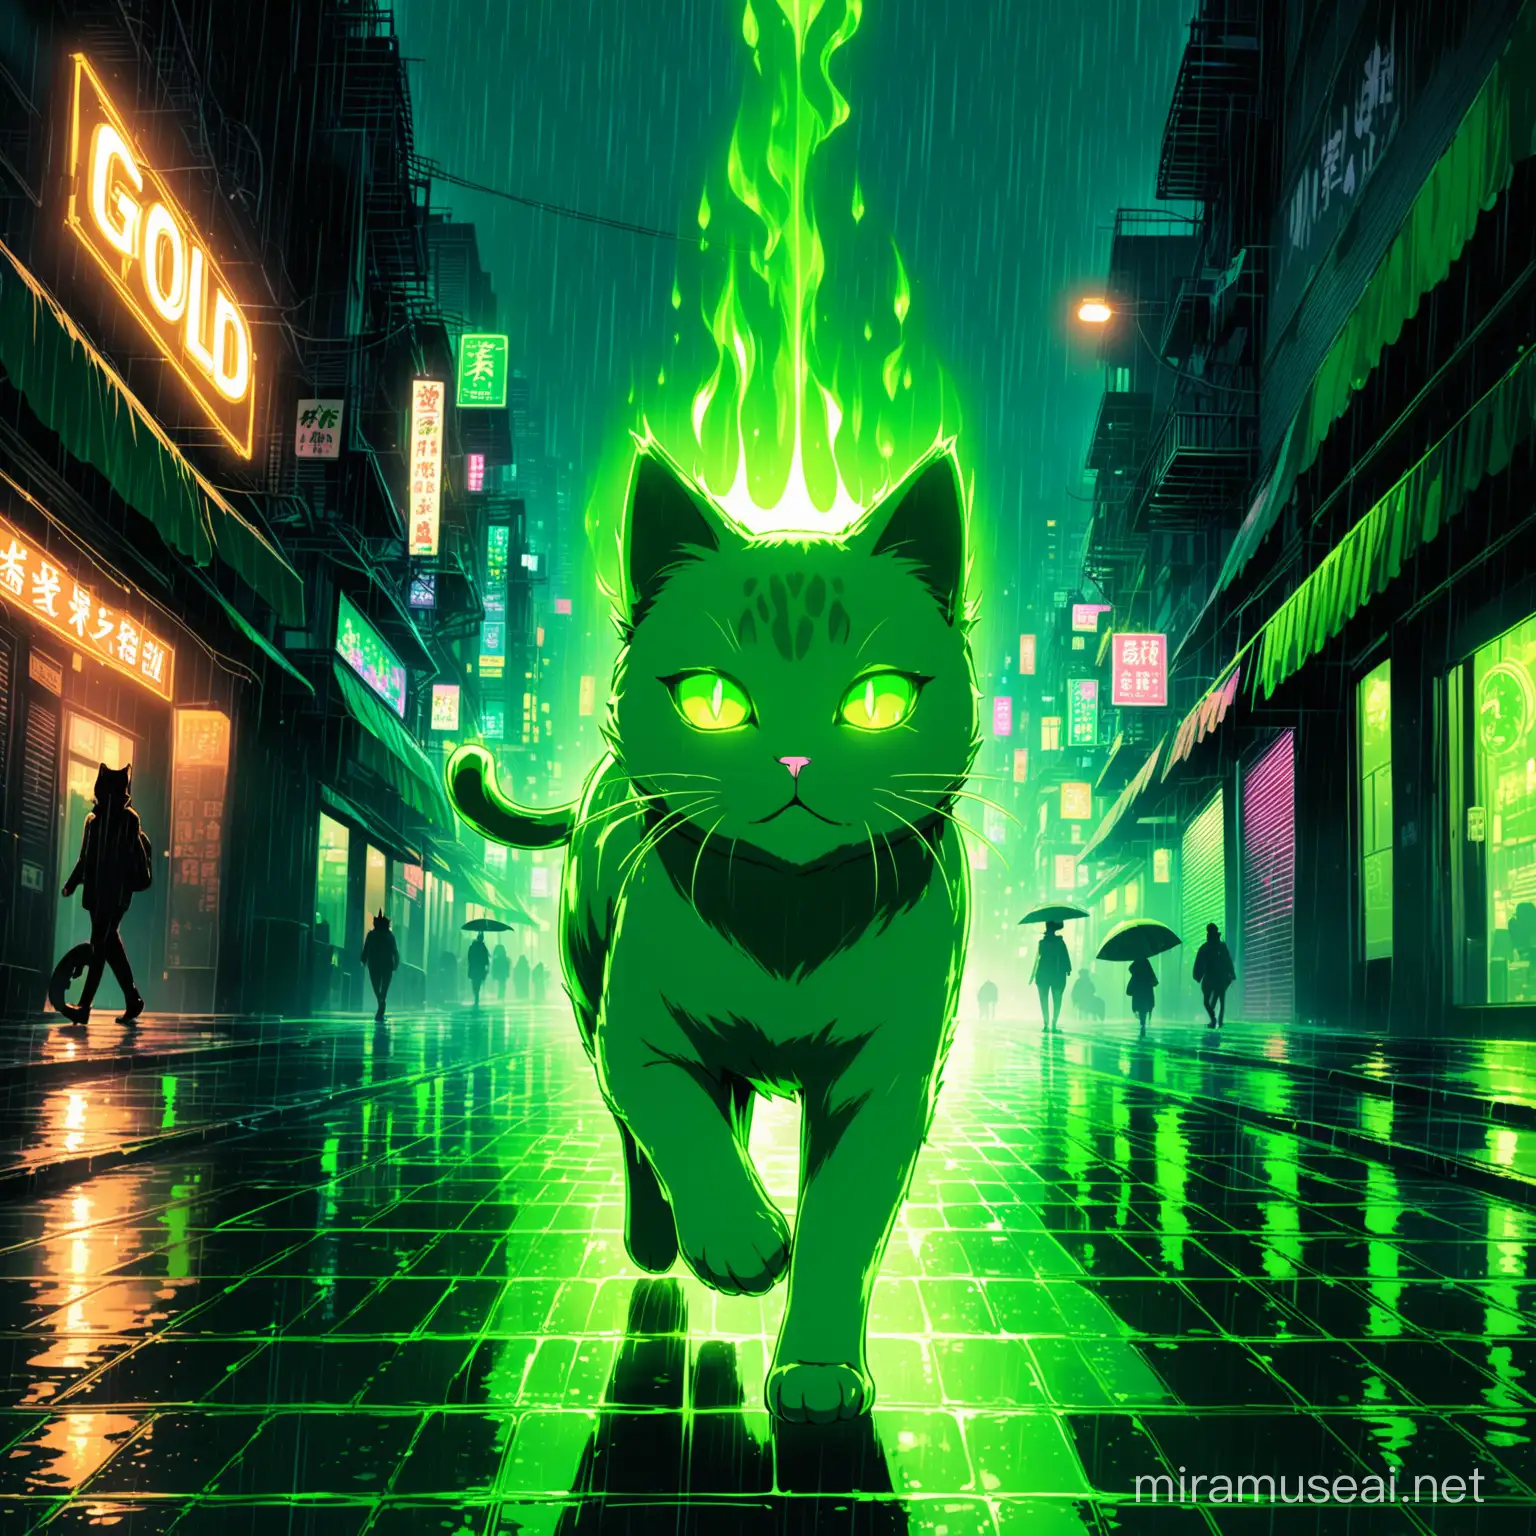 Majestic Gold Cat with Enchanting GreenFire Aura Strolls Through Neon Noir City Streets